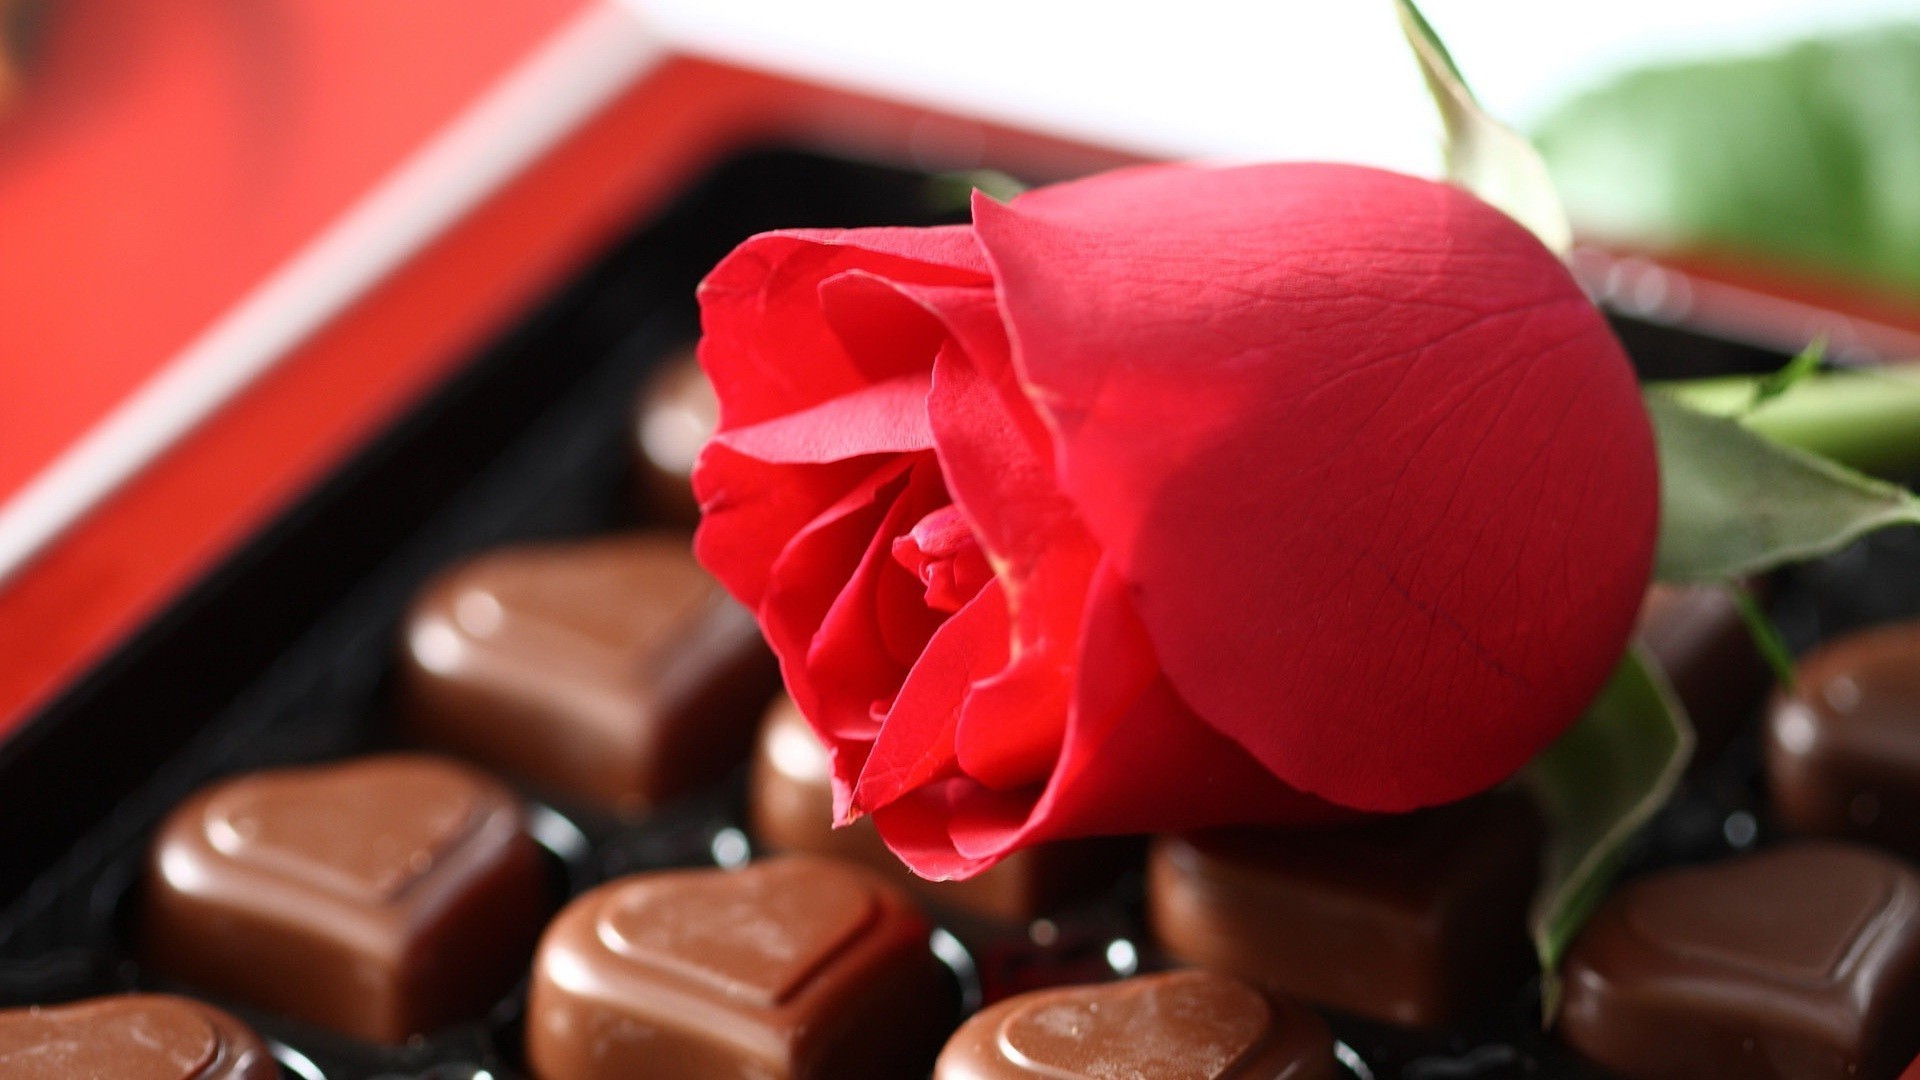 Red rose and chocolates wallpaper